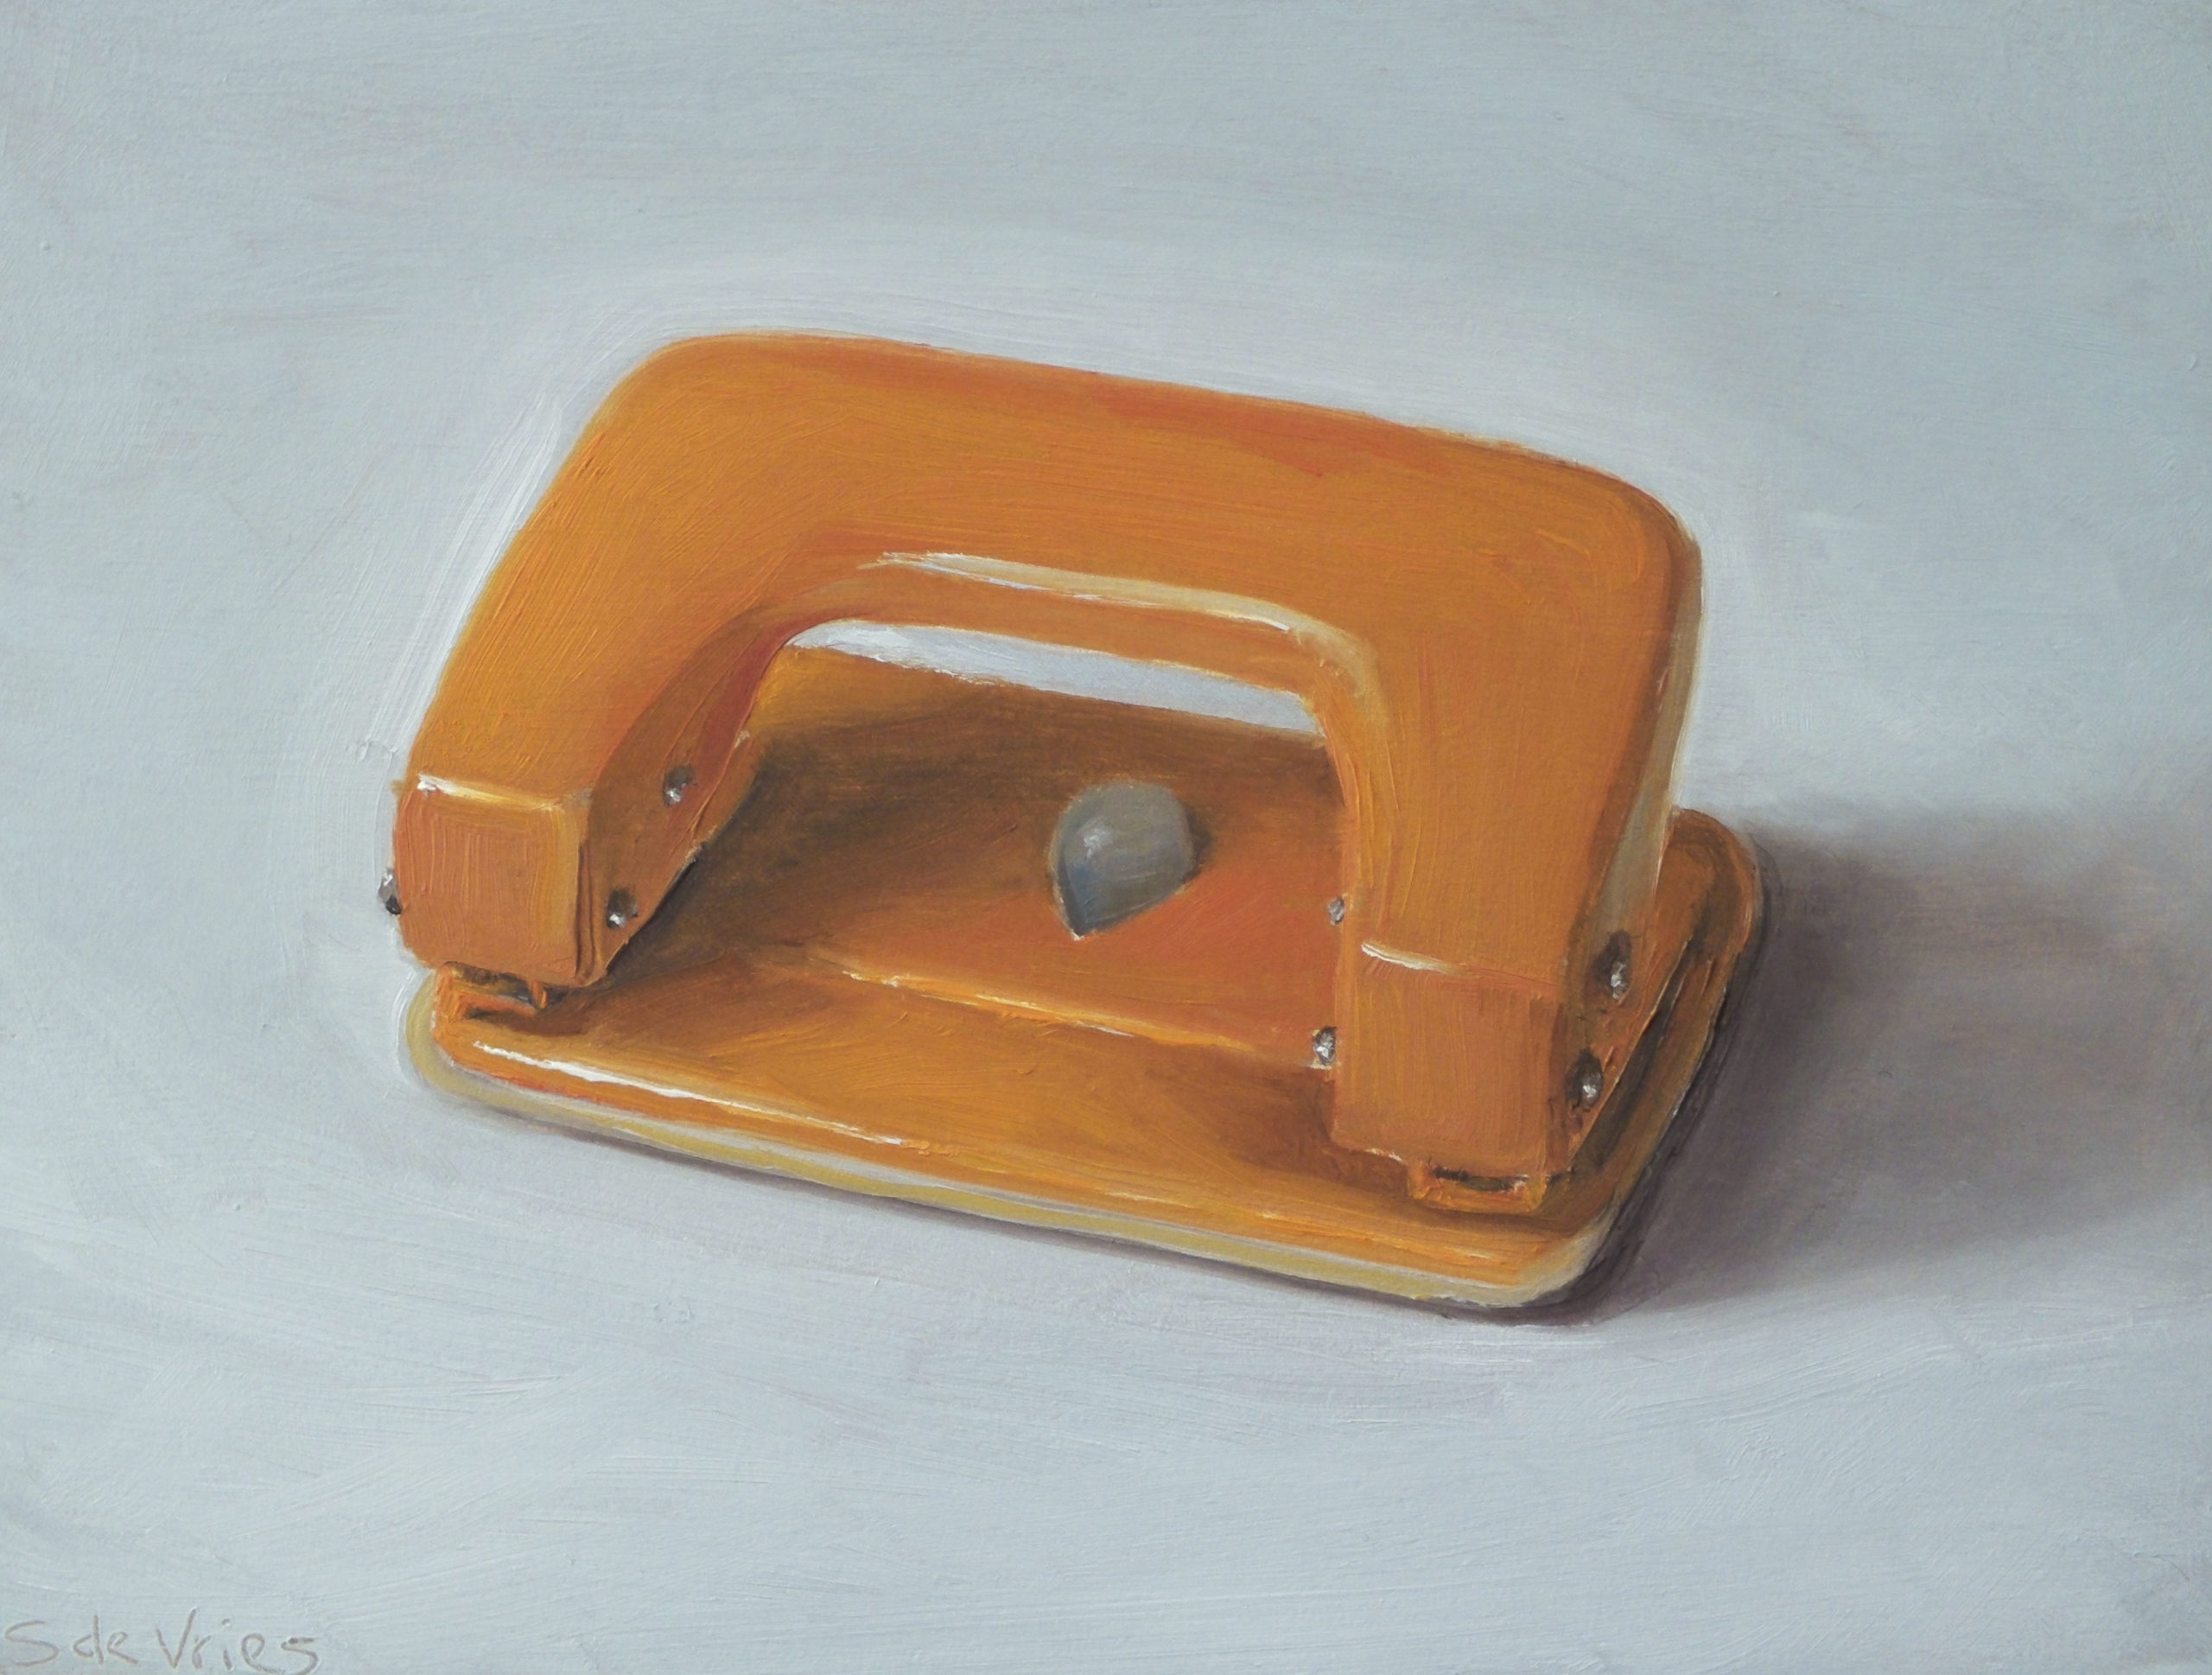 "Hole puncher" oil on wood, 13 x 17 cm